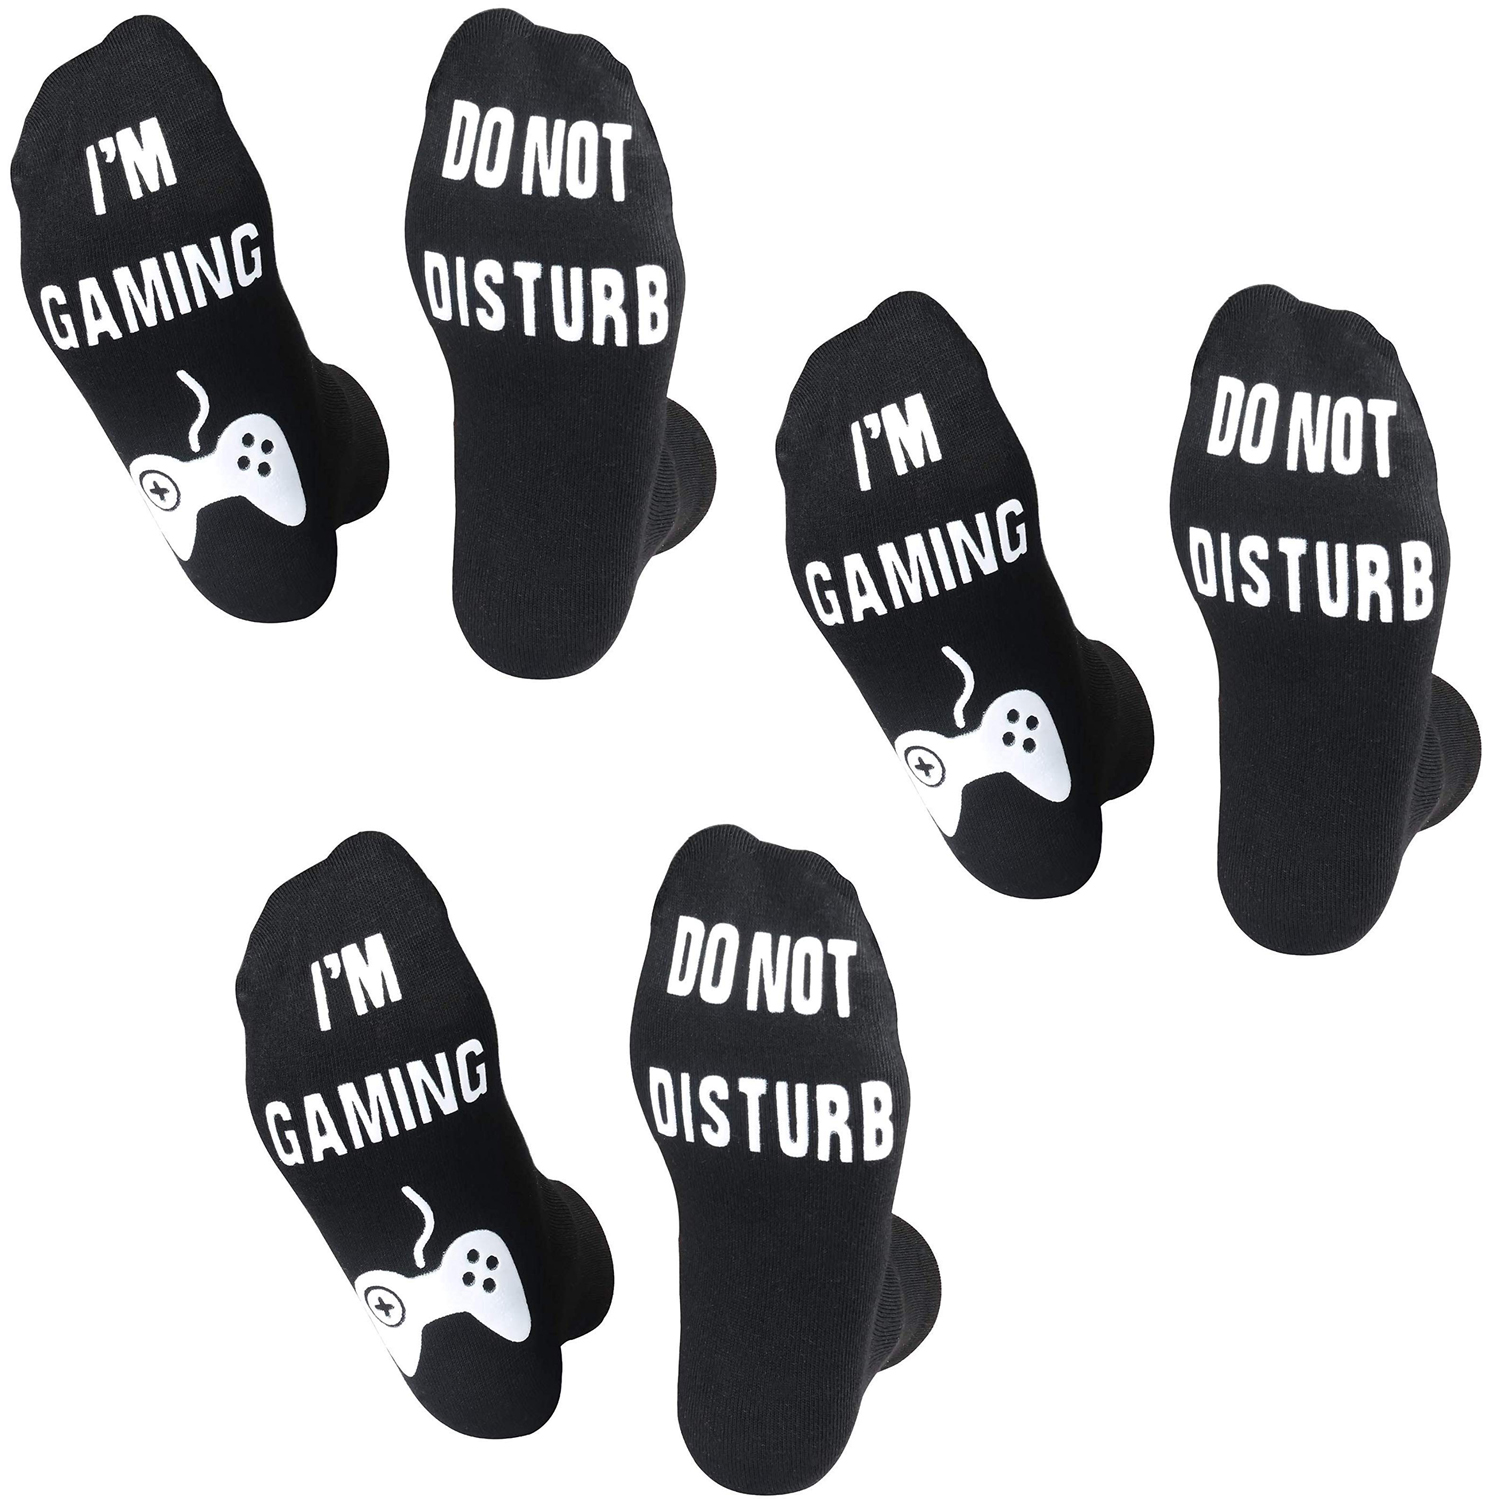 Do Not Disturb I'm Gaming Funny Novelty Cotton Socks for Gamer 3 Pairs